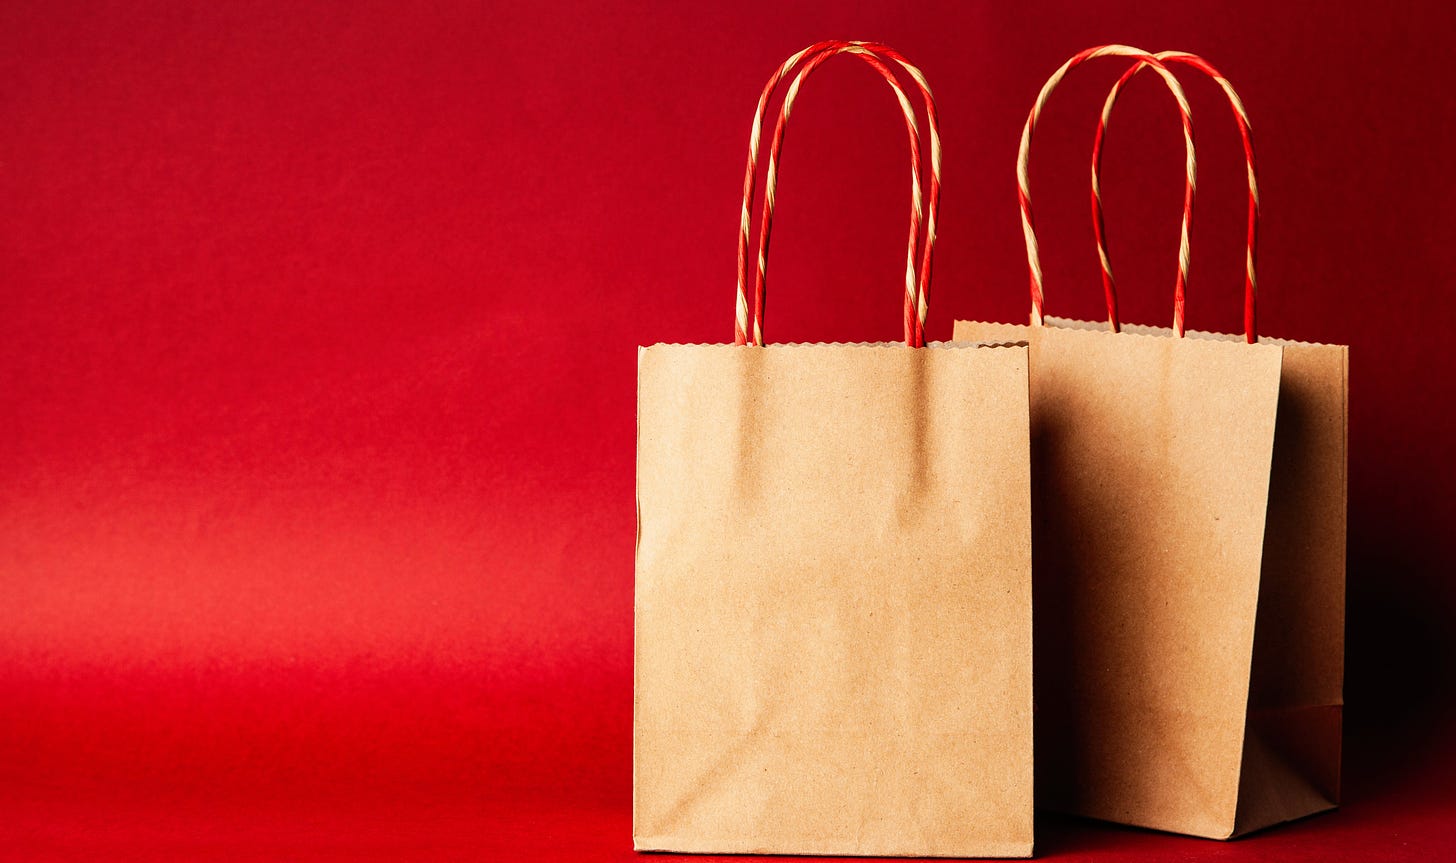 Two paper shopping bags against a dark red background